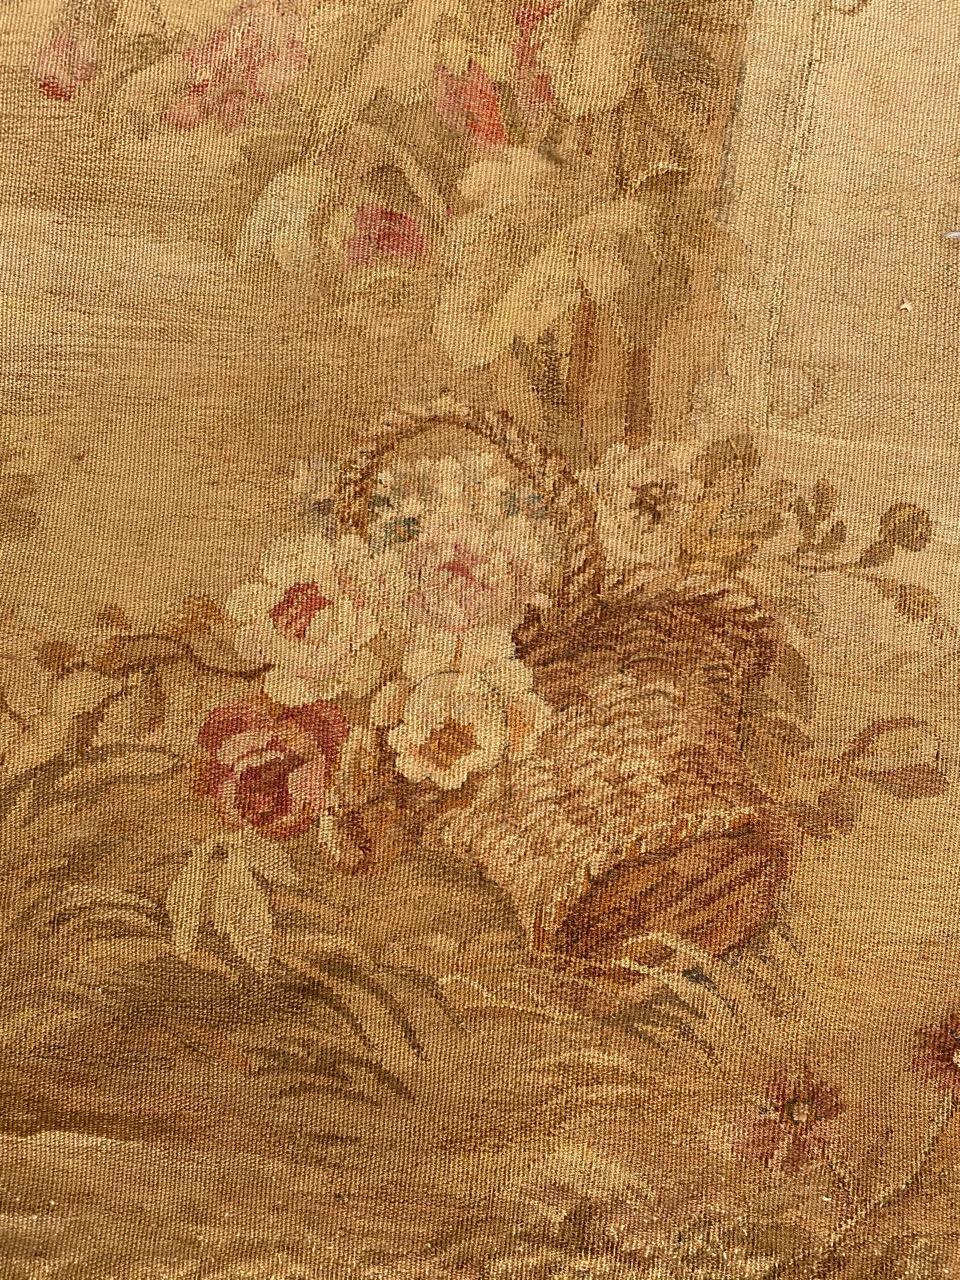 Bobyrug’s Luxurious Very Fine Silk French Aubusson Tapestry For Sale 14